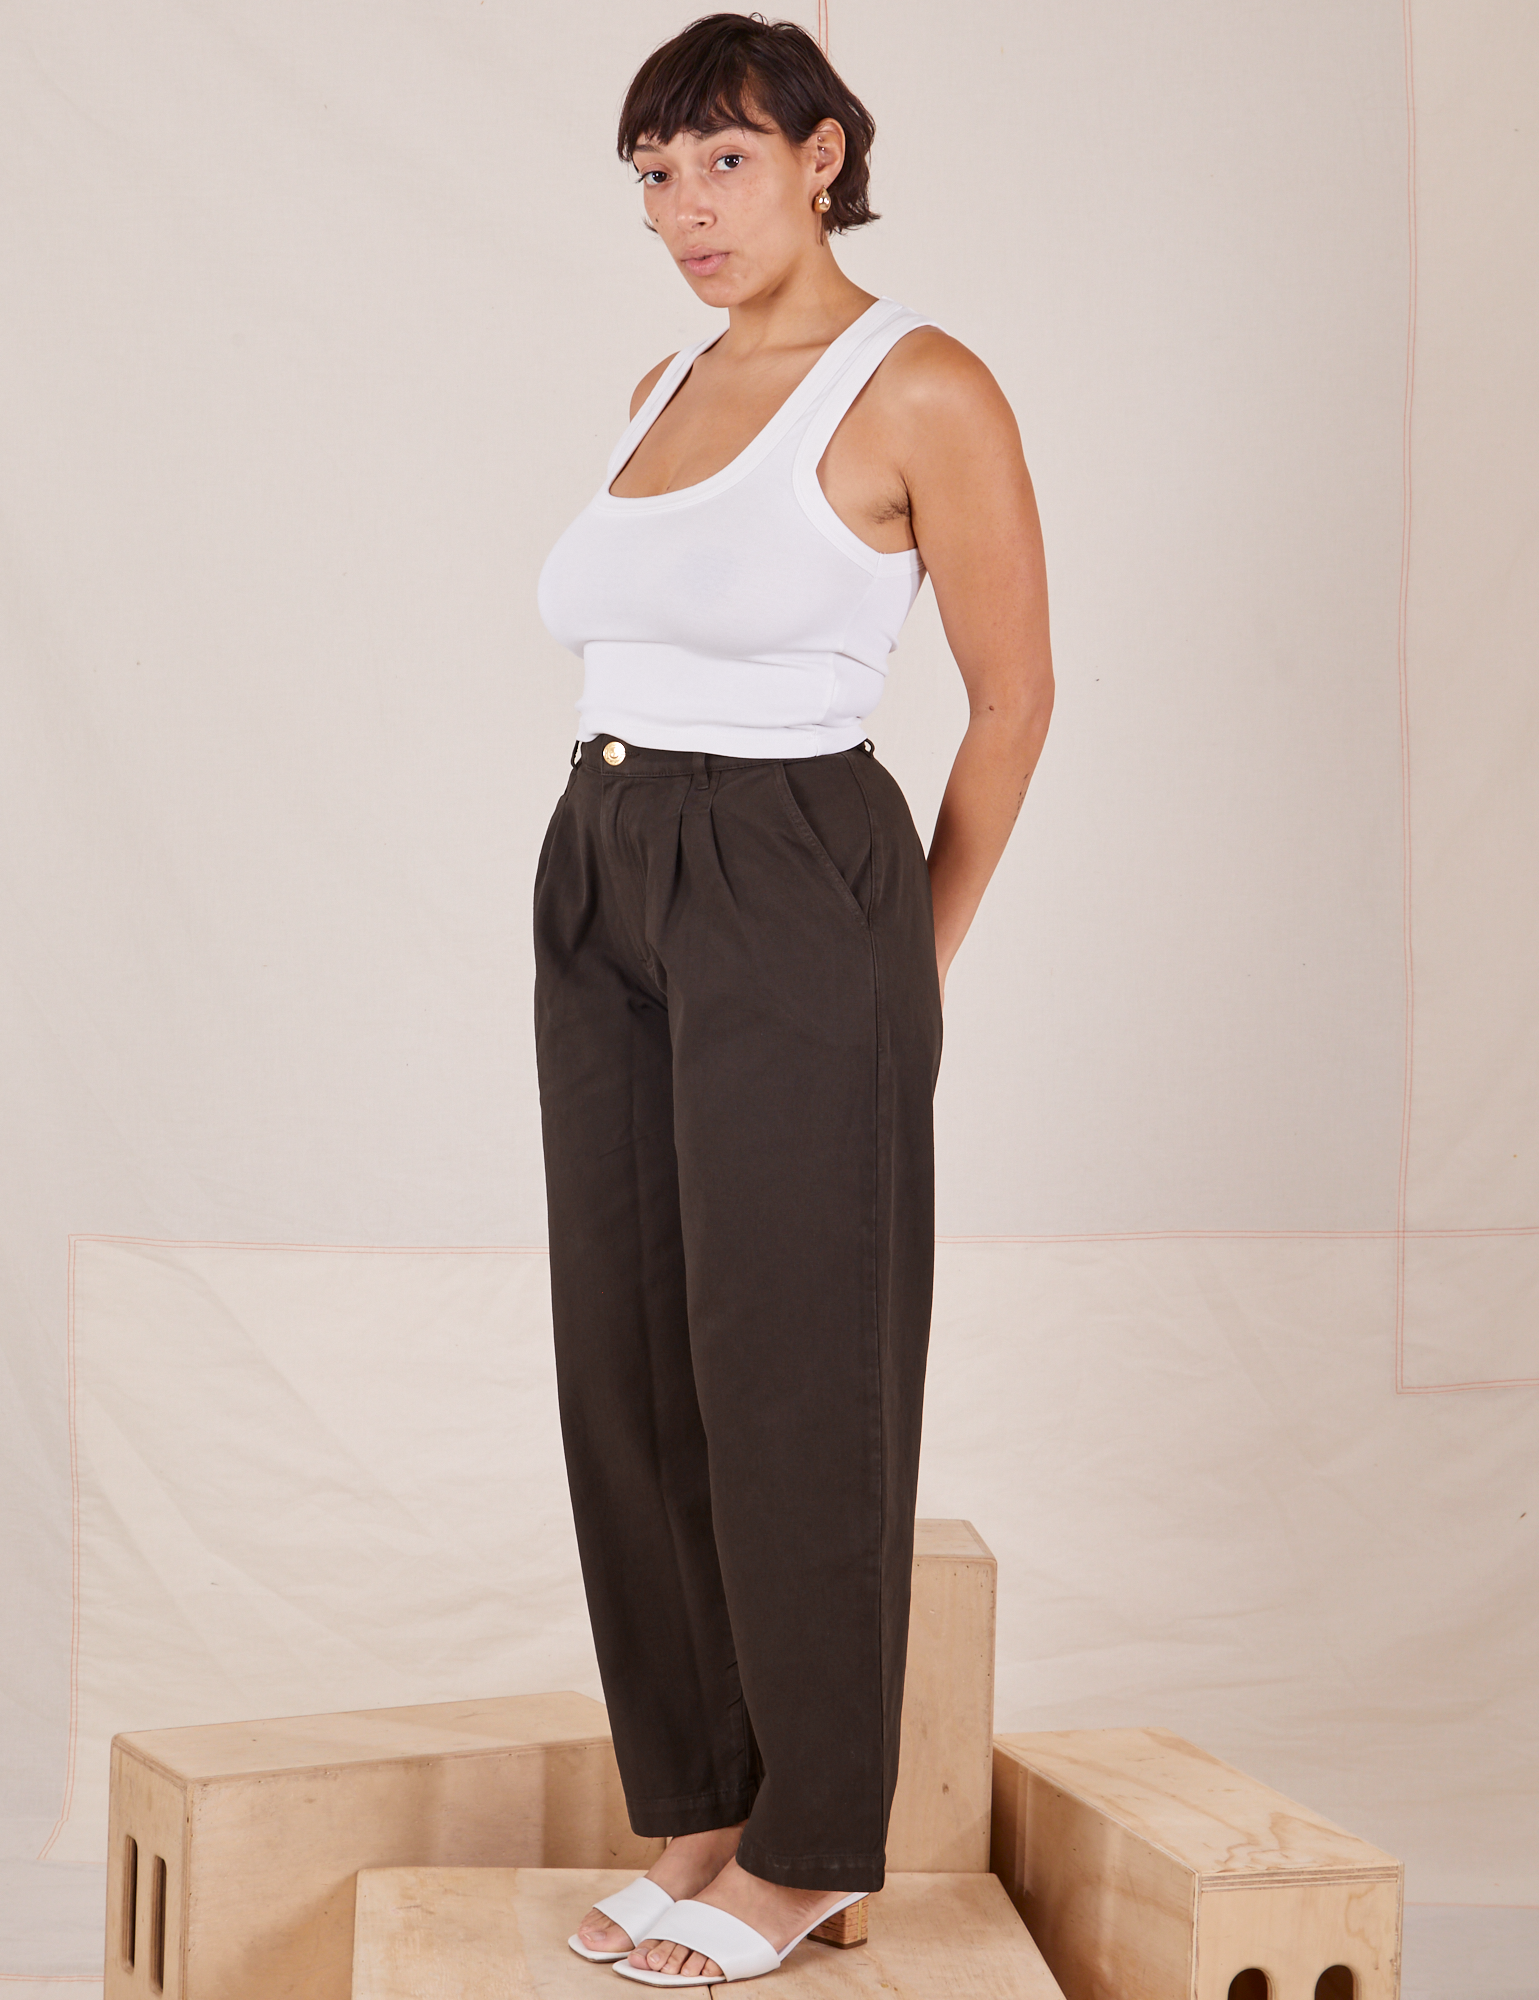 Angled view of Heavyweight Trousers in Espresso Brown and Cropped Tank Top in vintage tee off-white worn by Tiara.